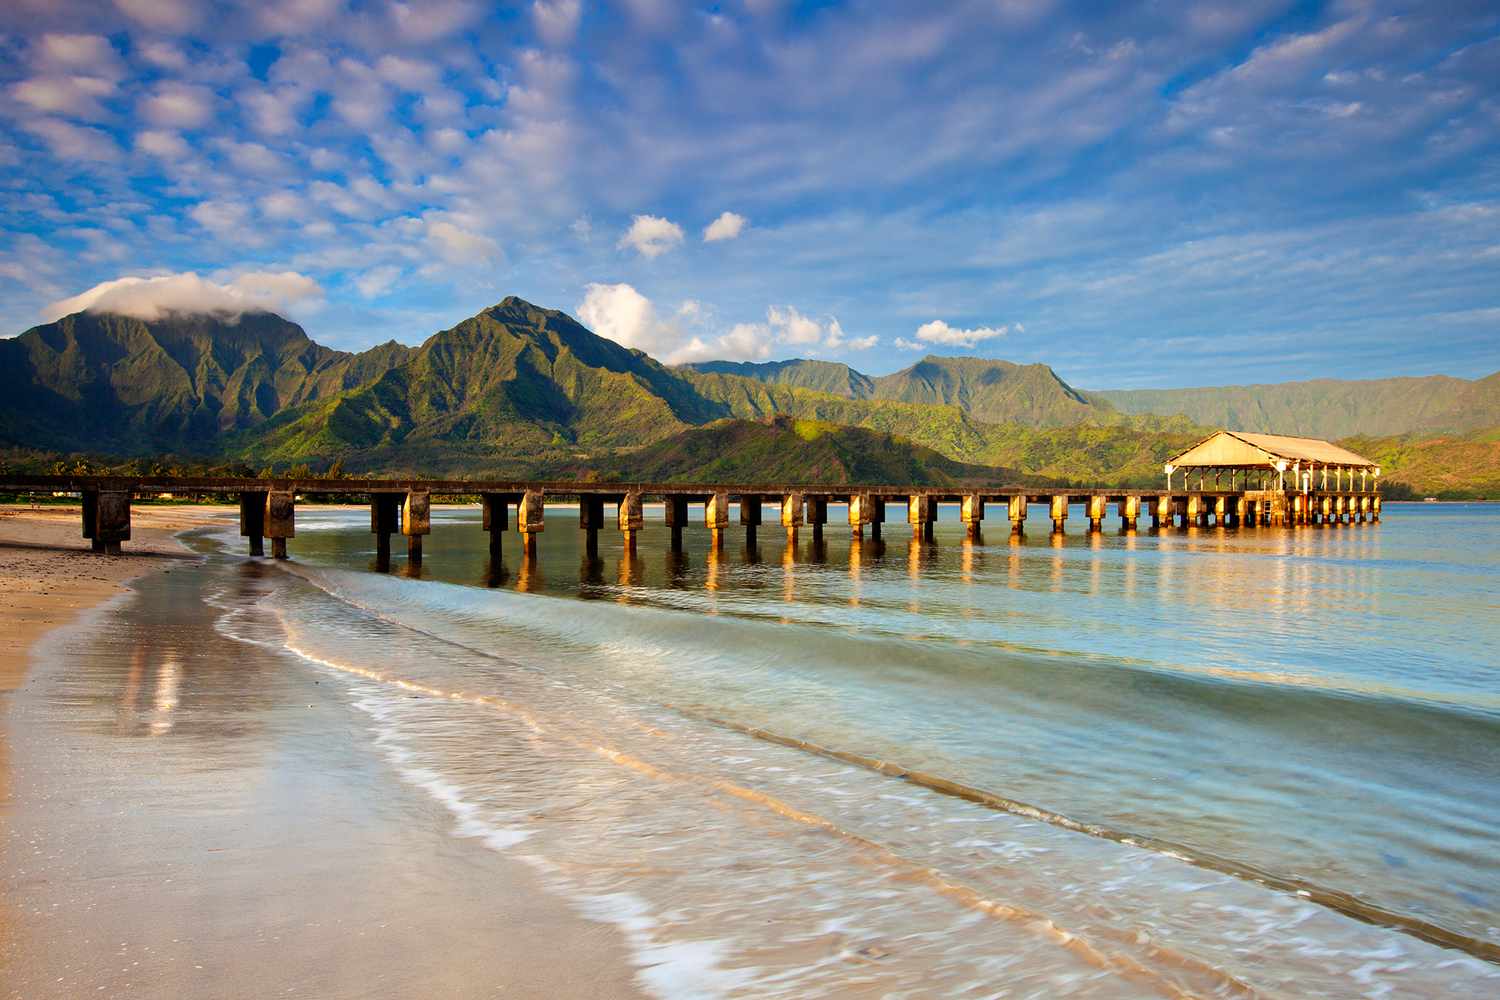 Top 10 Beaches in the U.S. for the Ultimate Beach Vacation